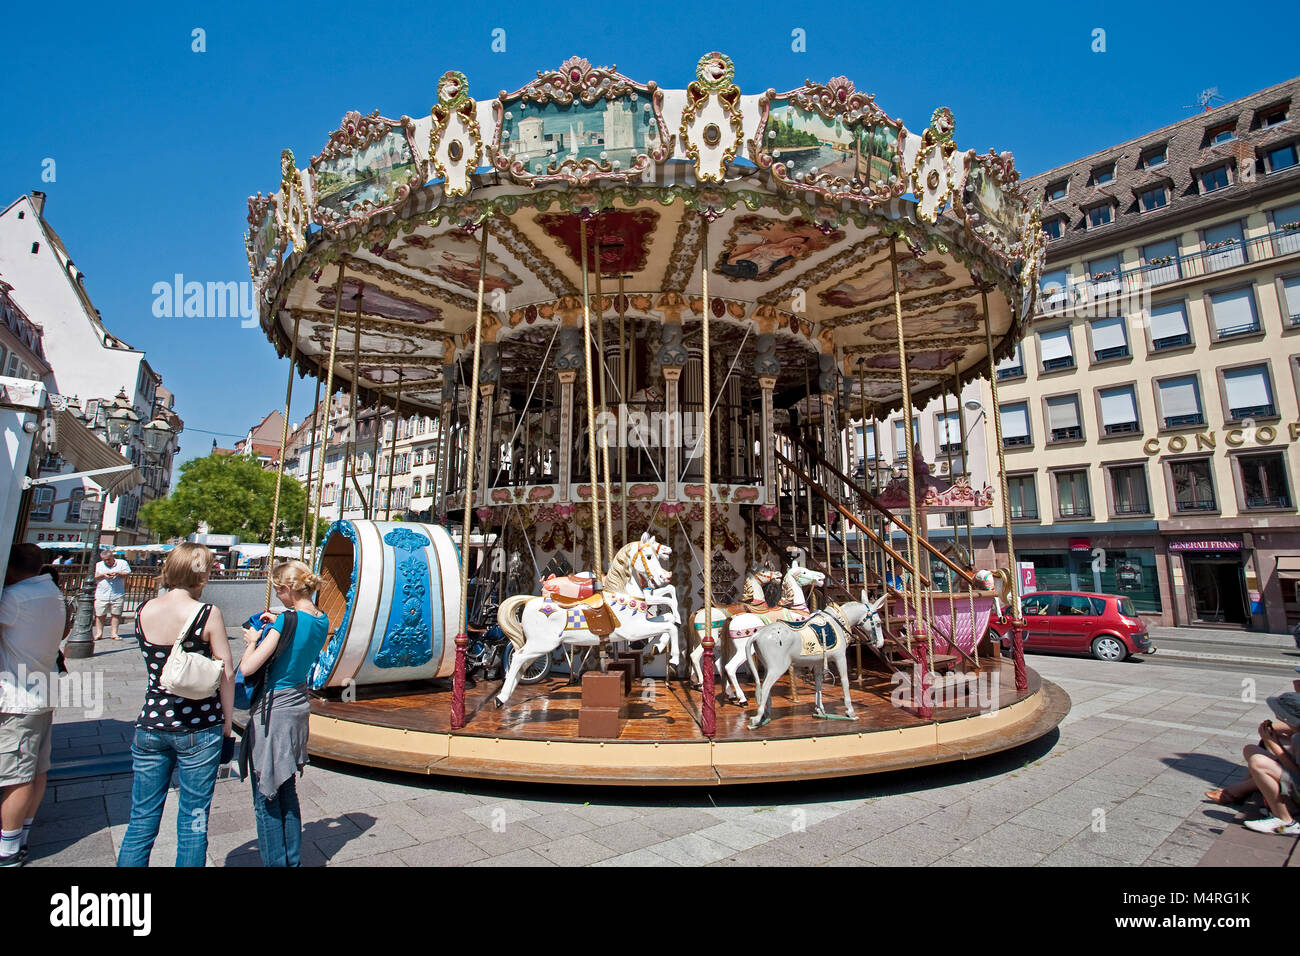 Historical roundabout, carrousel, for kids, Strasbourg, Alsace, France, Europe Stock Photo